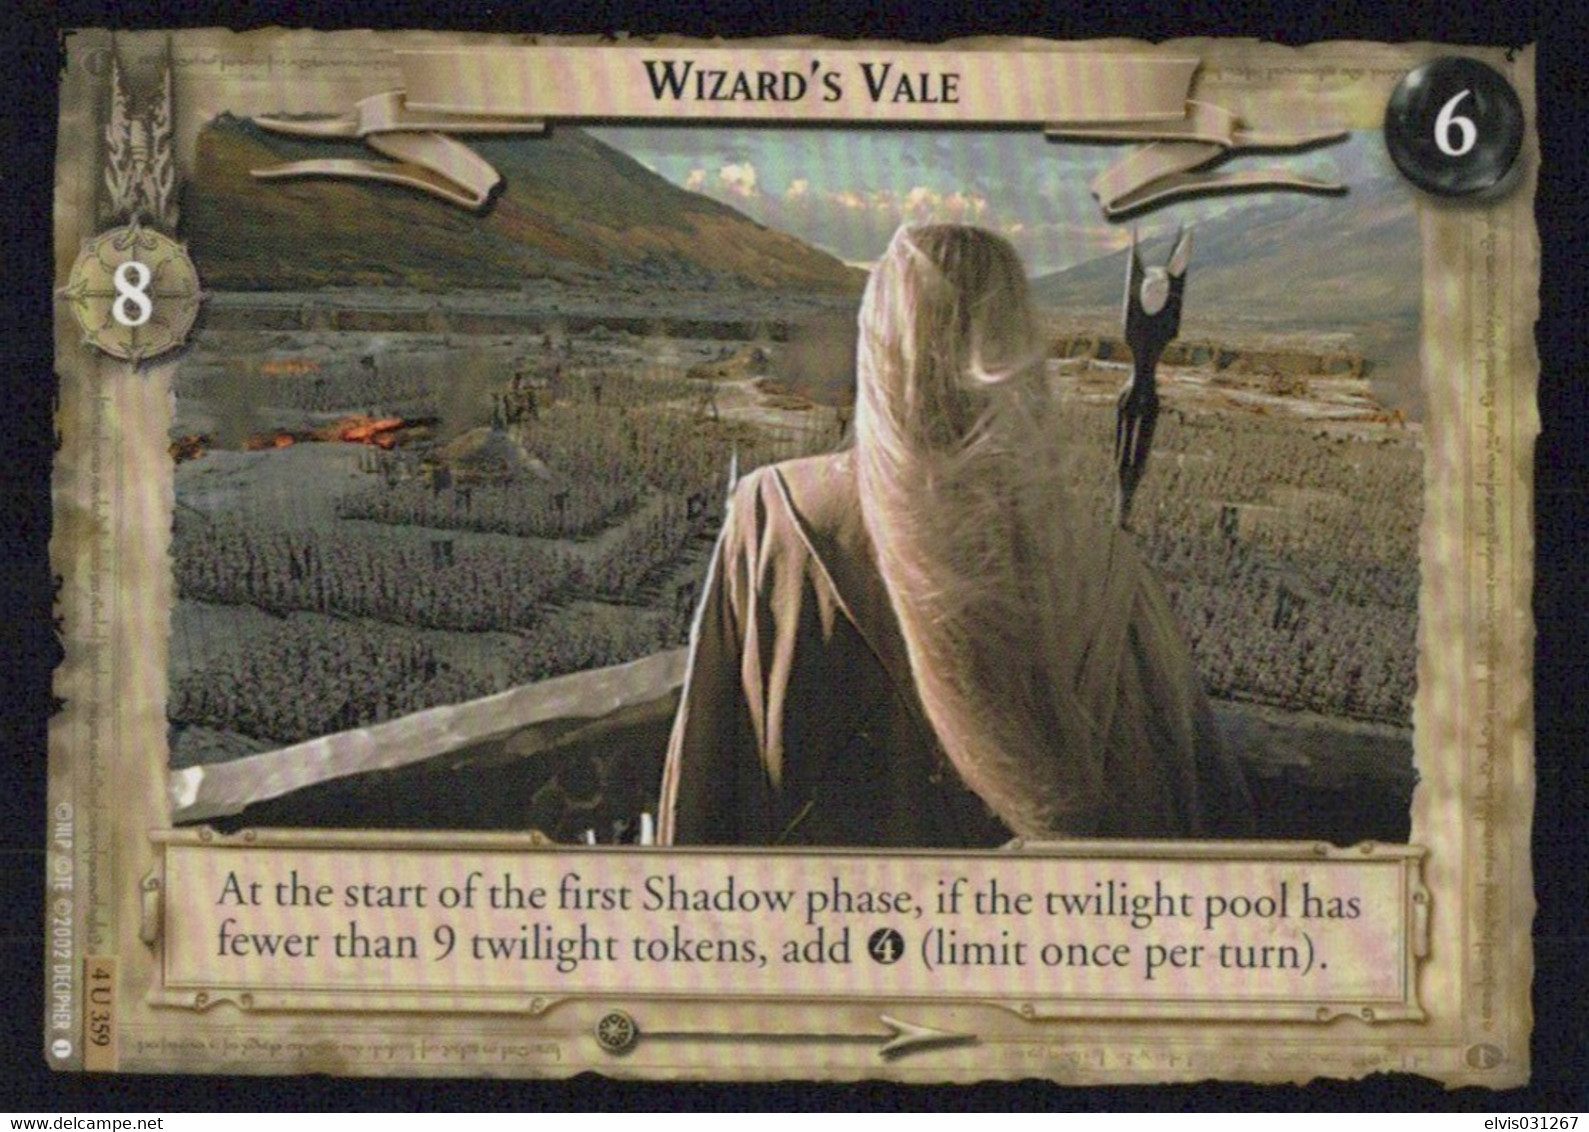 Vintage The Lord Of The Rings: #6-8 Wizard's Vale - EN - 2001-2004 - Mint Condition - Trading Card Game - Herr Der Ringe